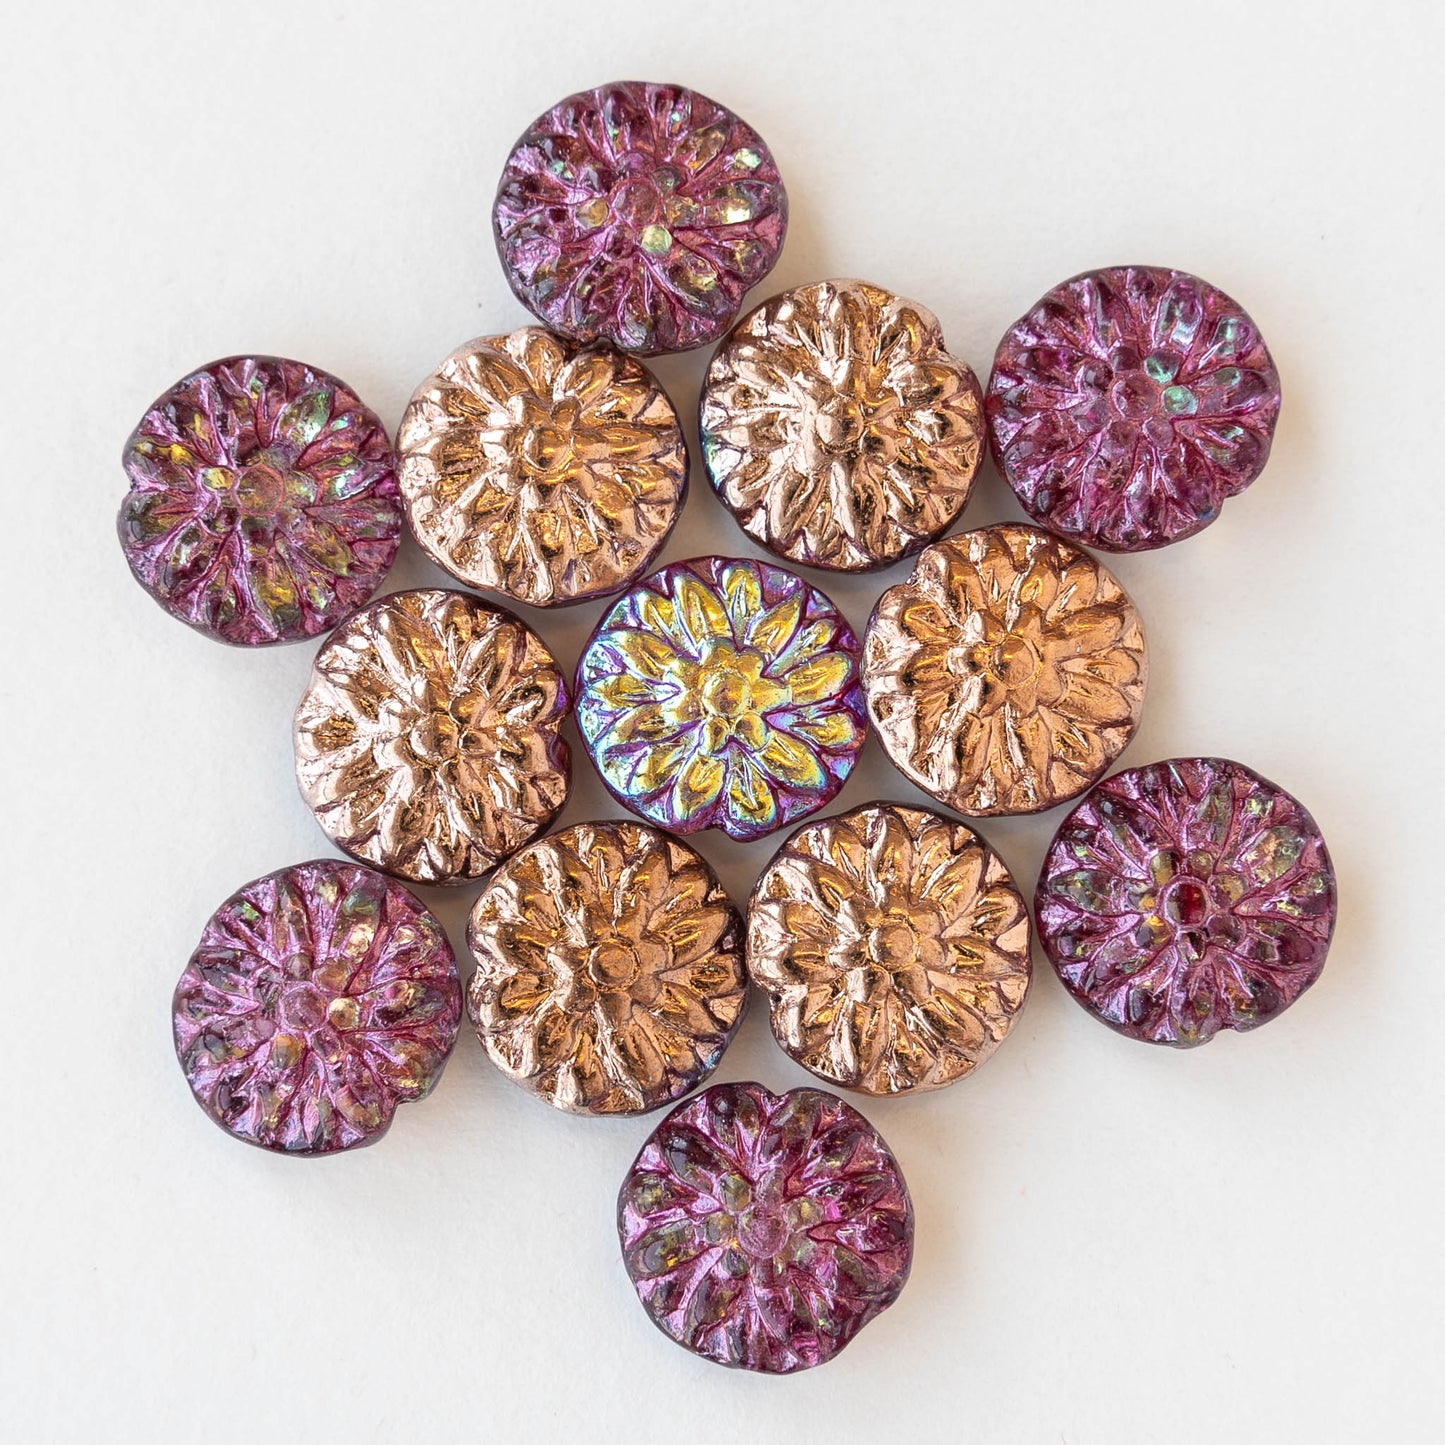 Load image into Gallery viewer, 14mm Dahlia Flower Beads - Copper and Metallic Pink Iridescent Finish - 10 Beads
